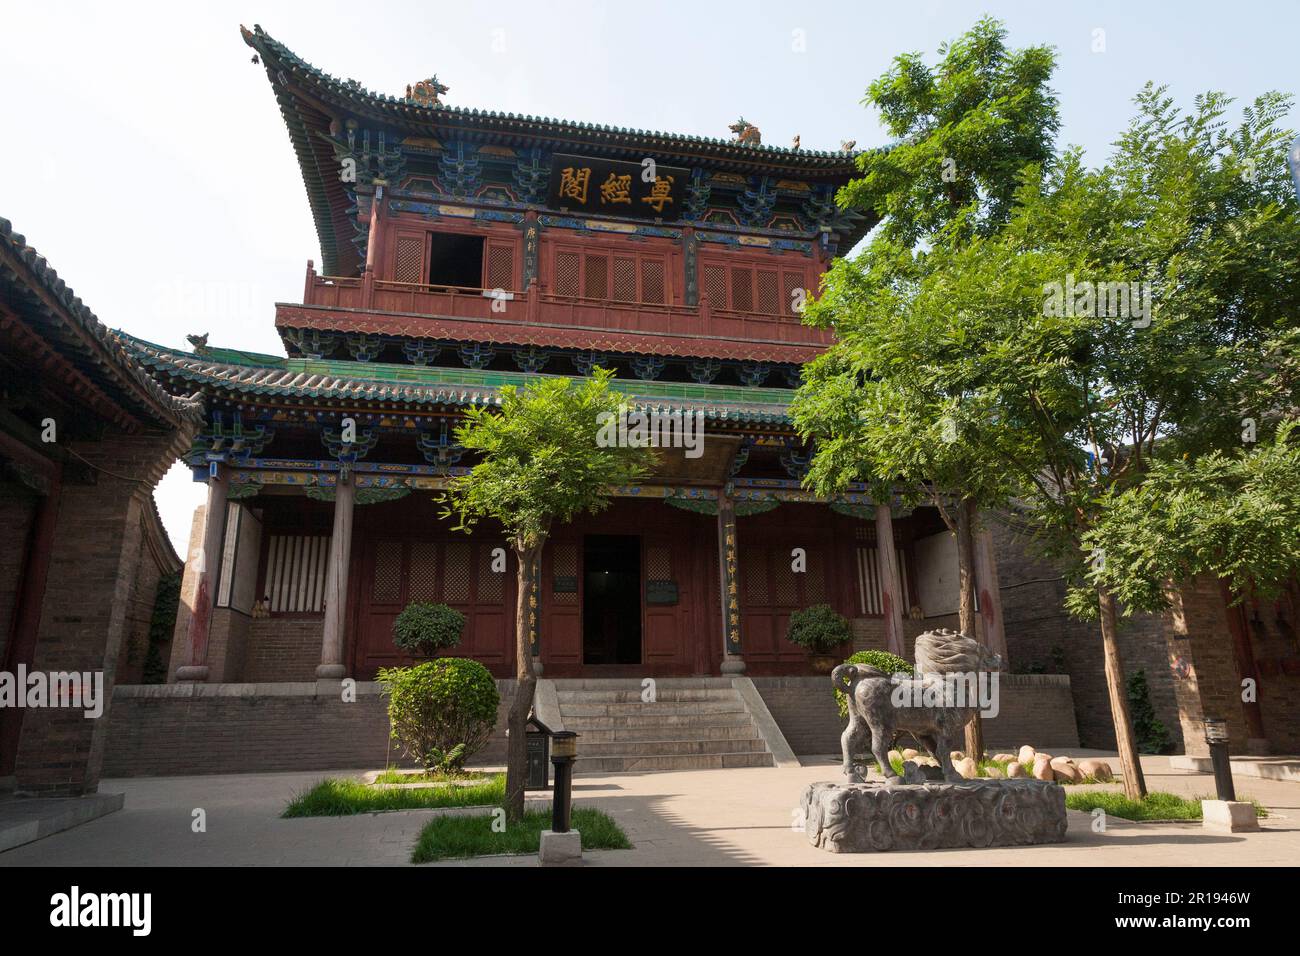 Beautiful garden and building / buildings in grounds of The Pingyao Confucian Temple situated in old town Pingyao, Jinzhong, Shanxi, PRC. China. (125) Stock Photo